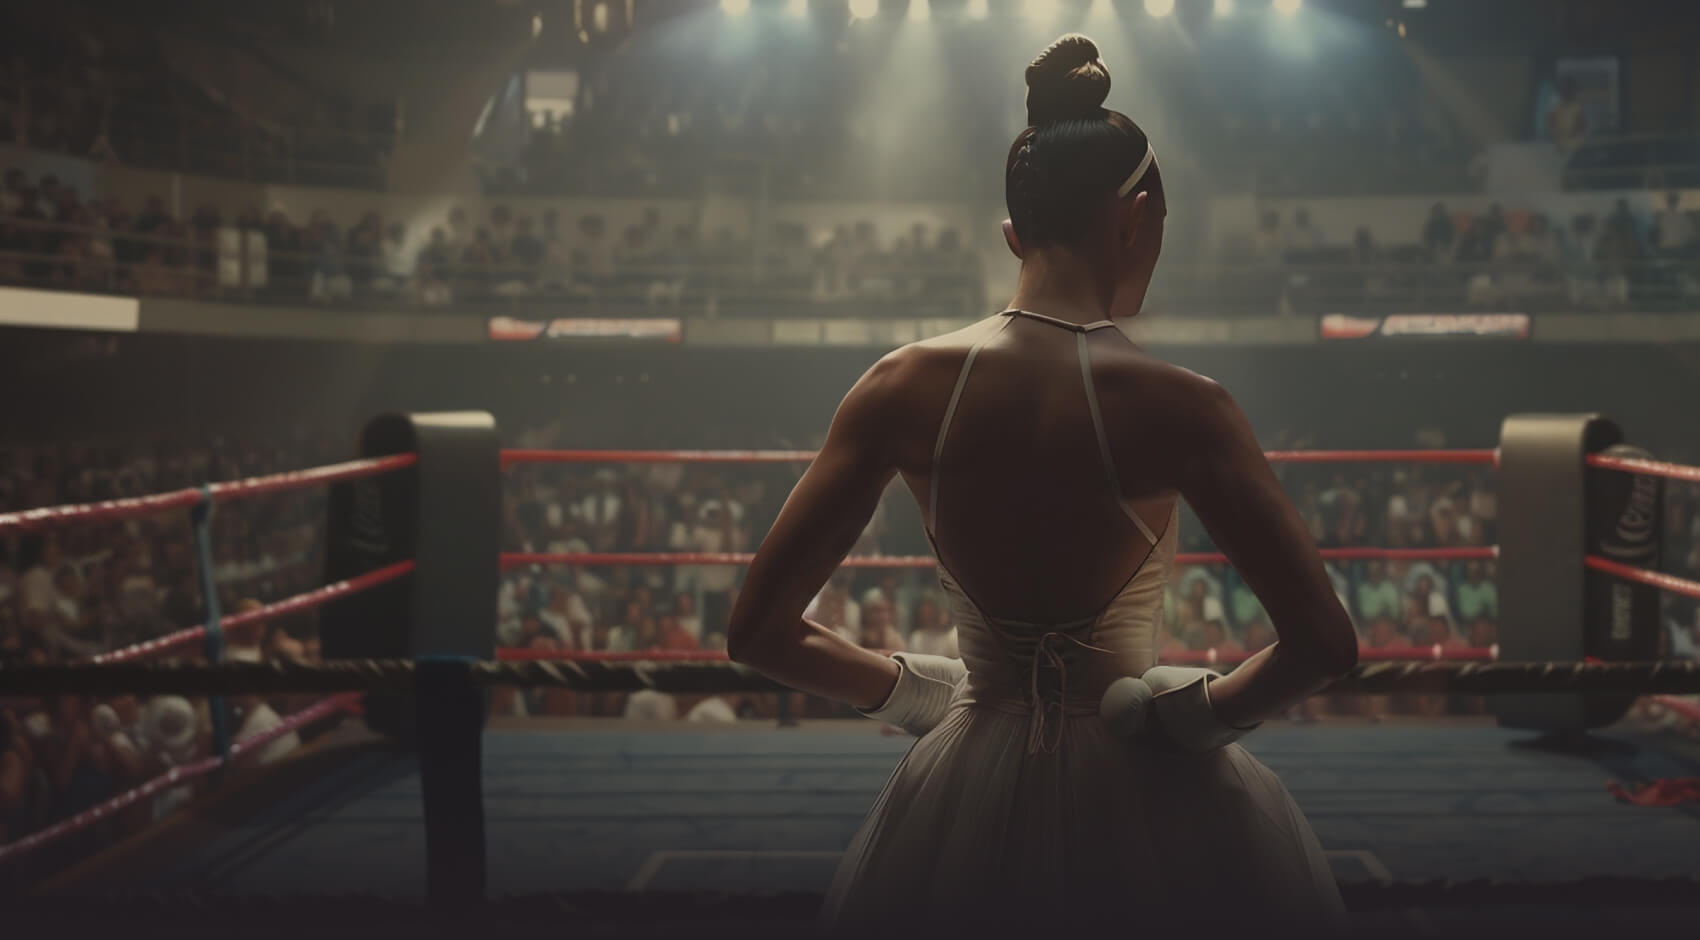 Ballerina in a boxing ring